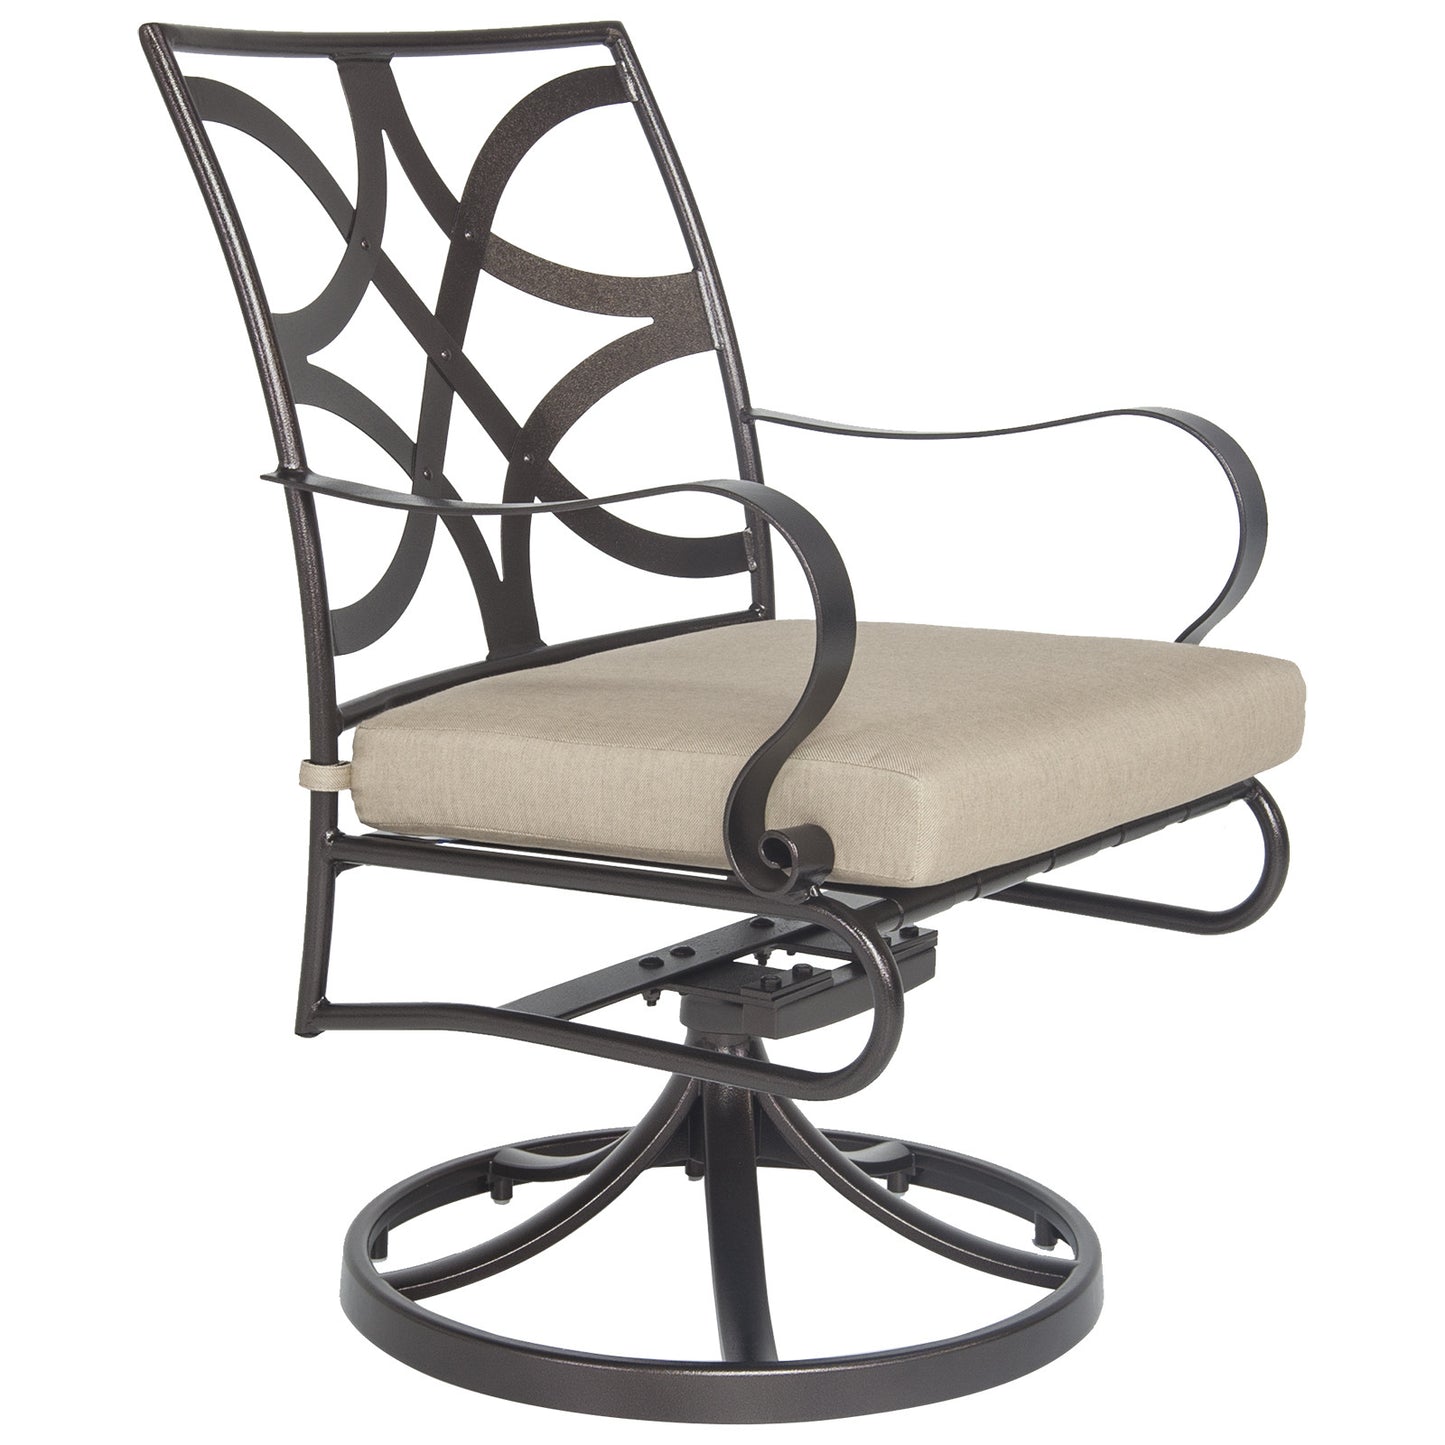 O.W. Lee's Marquette Outdoor Patio Swivel Rocker Dining Arm Chair is available at Jacobs Custom Living.